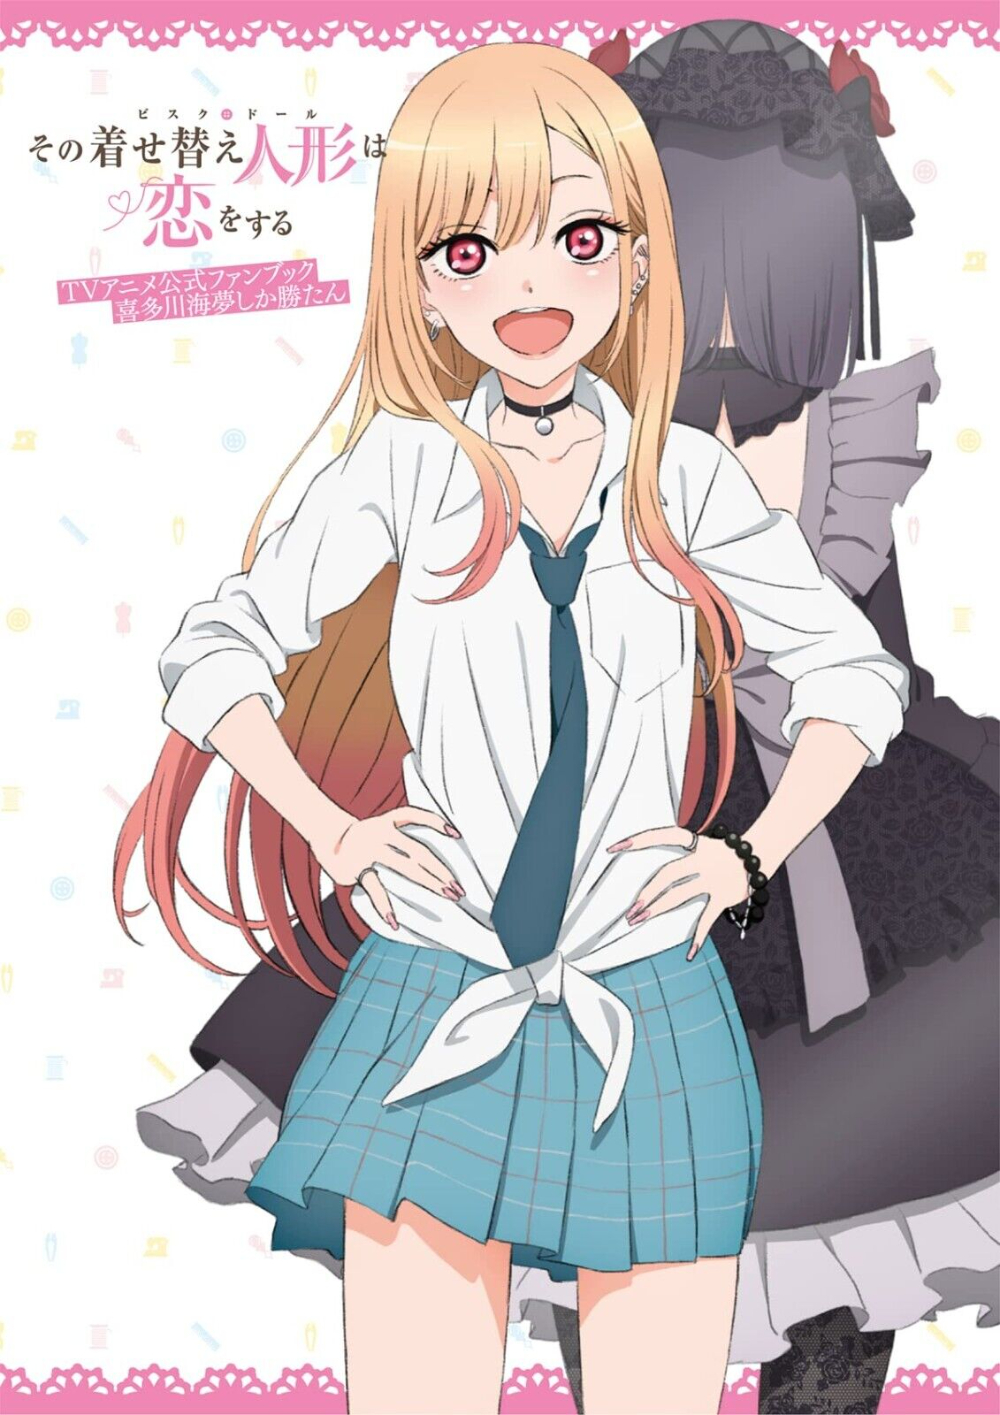 My Dress-Up Darling Official Anime Fanbook by Shinichi Fukuda